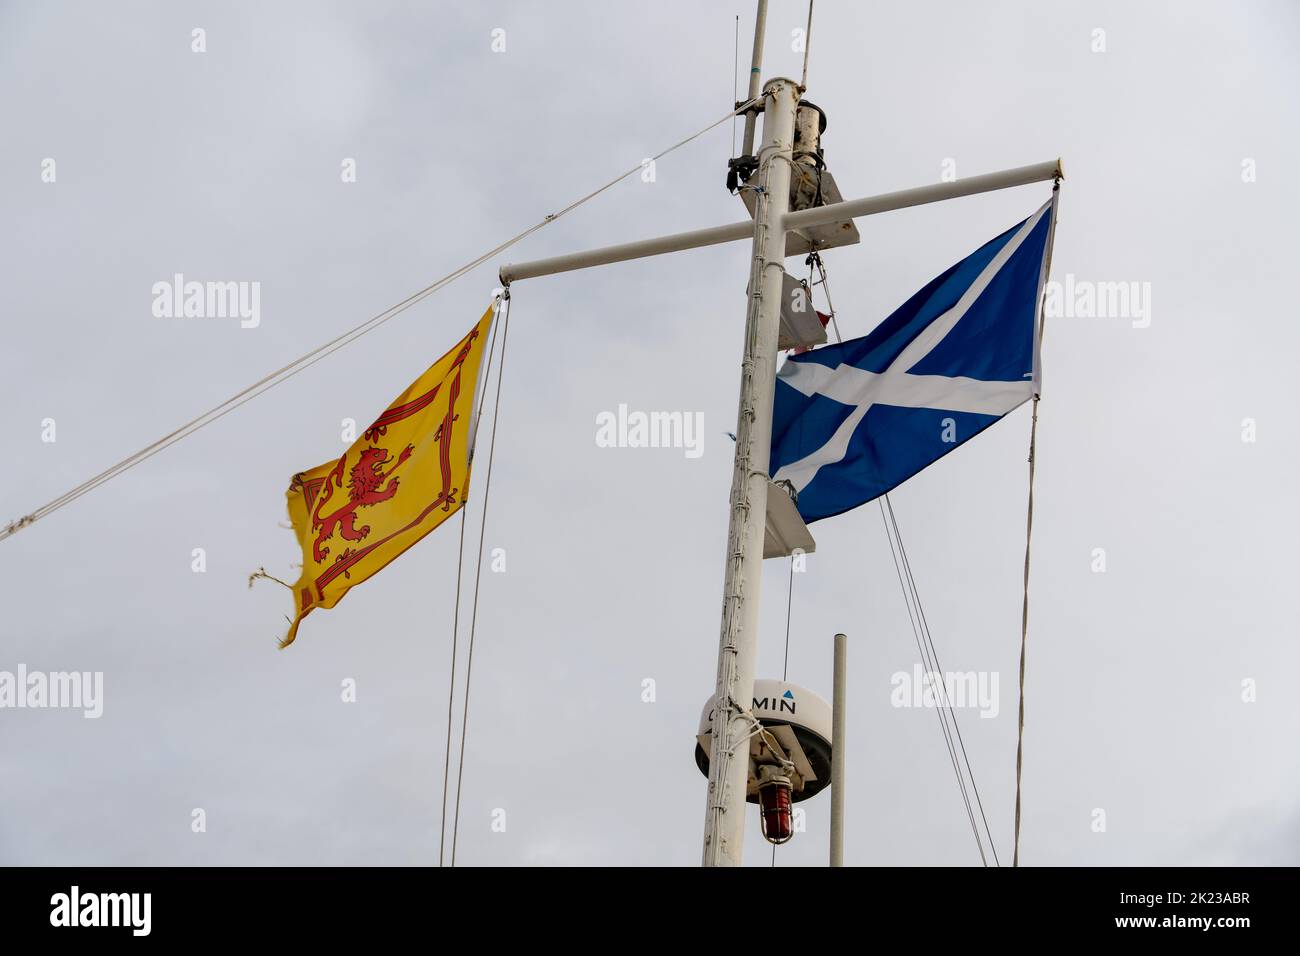 Two Scottish flags - The Saltire and the Royal Banner of Scotland on a boat in Scotland, UK. Stock Photo